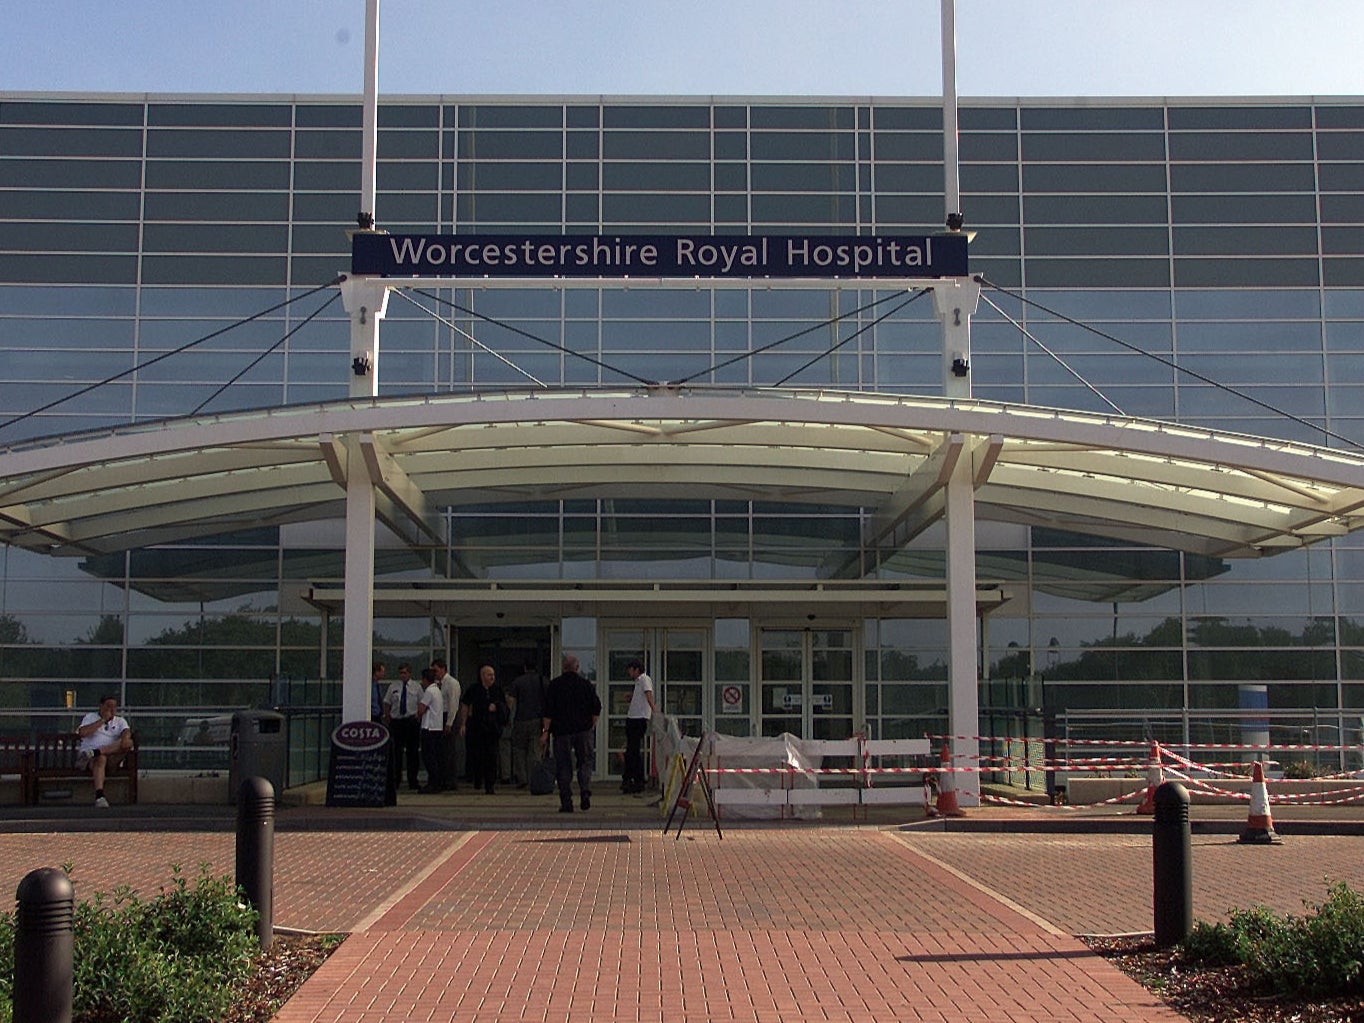 Insiders raised fears about care at Worcestershire Royal Hospital